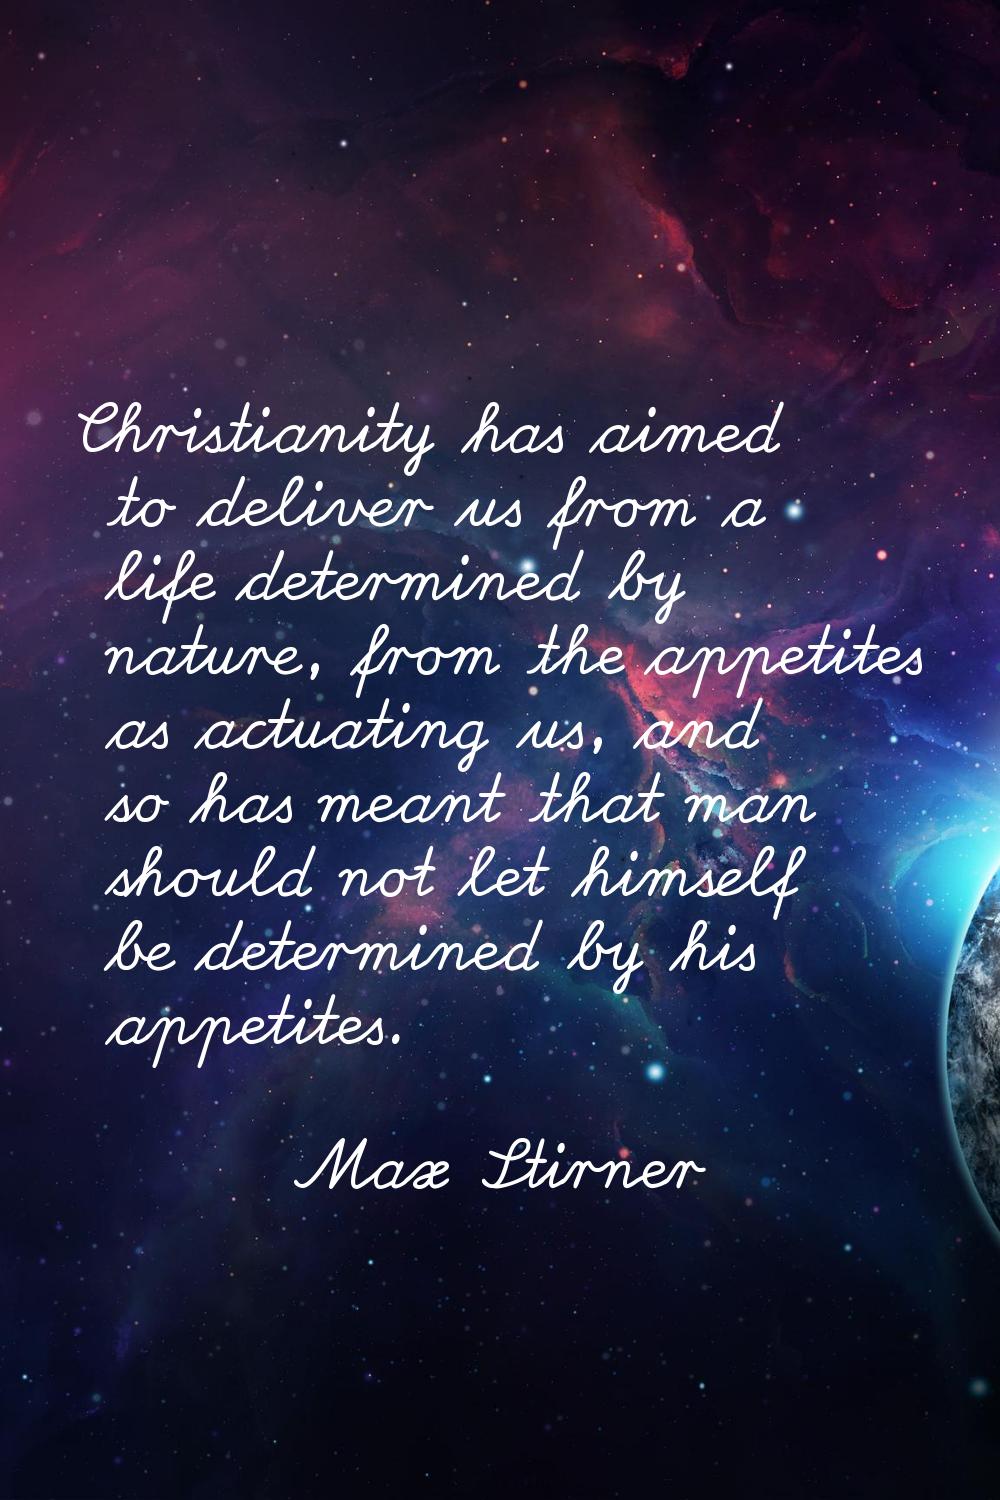 Christianity has aimed to deliver us from a life determined by nature, from the appetites as actuat